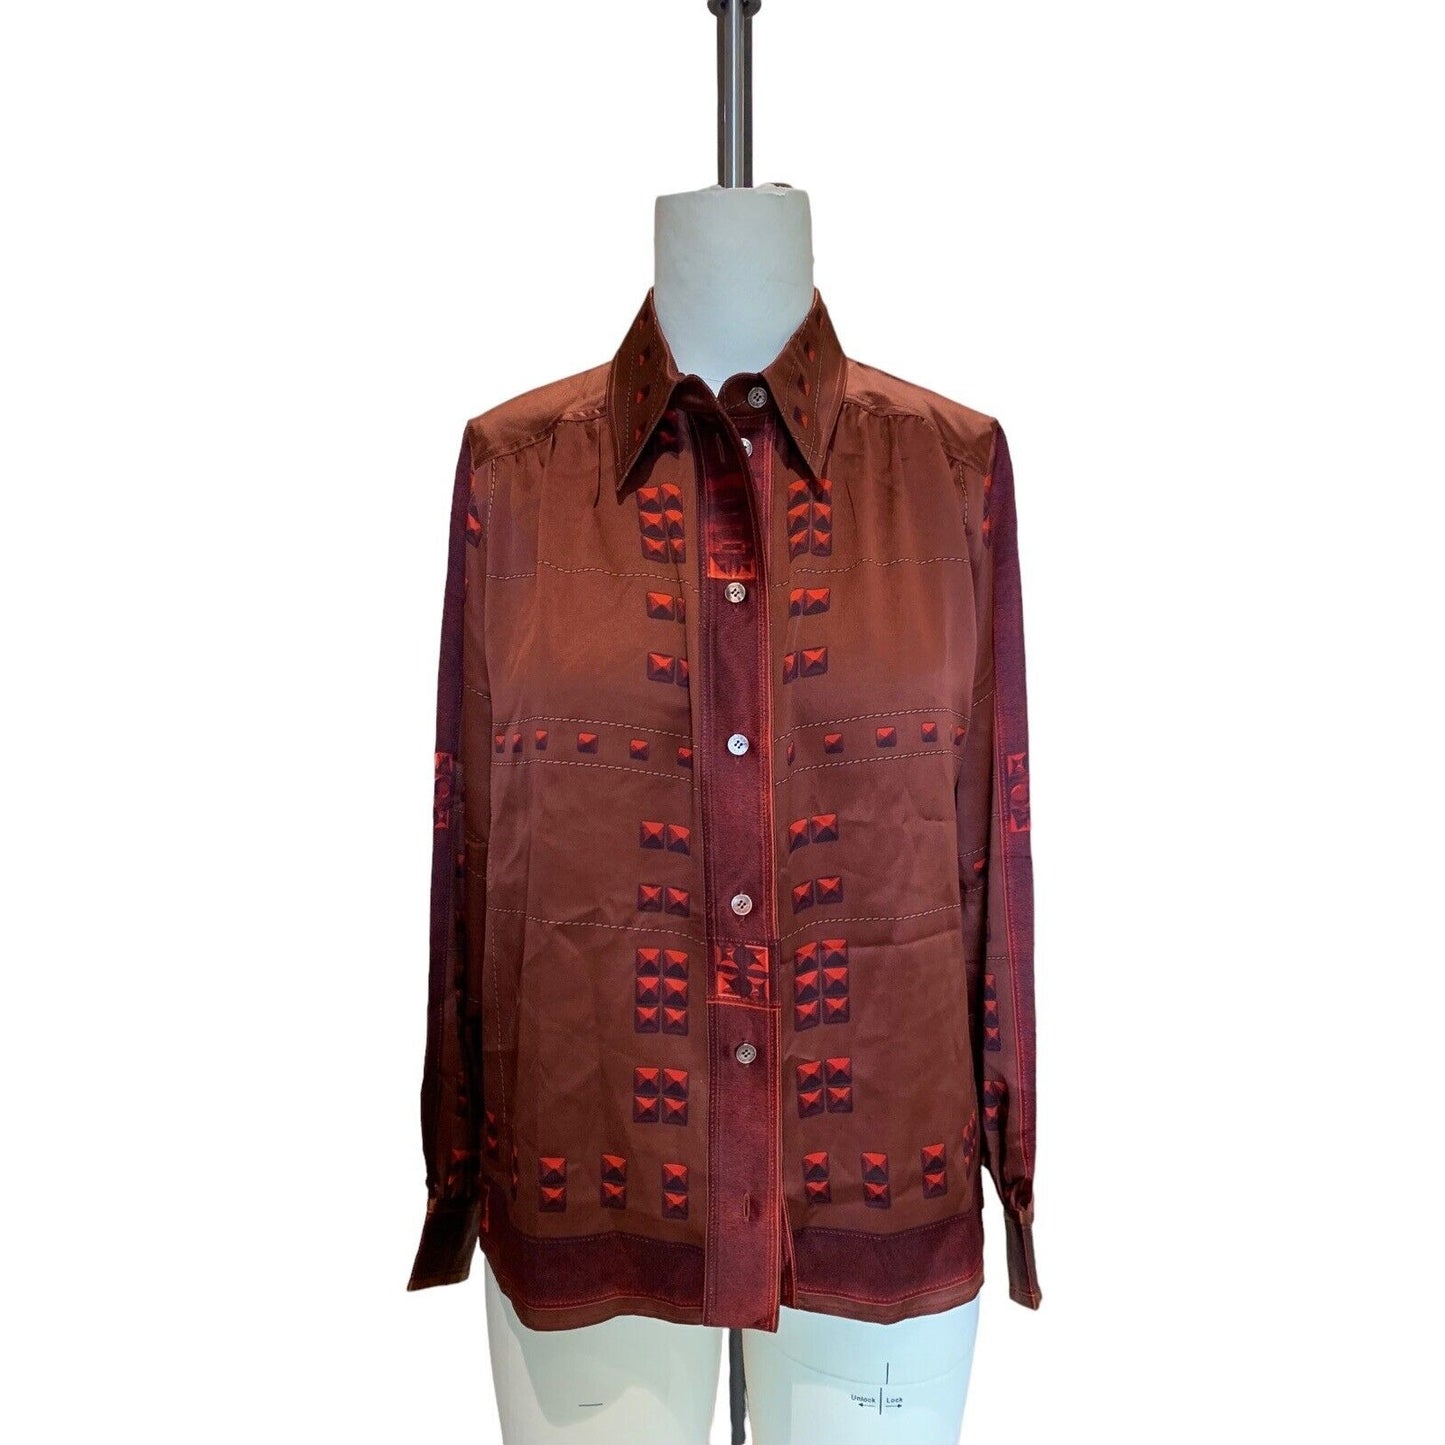 Hermes Women's Silk Blouse with Gathered Shoulder and Blouson Sleeve